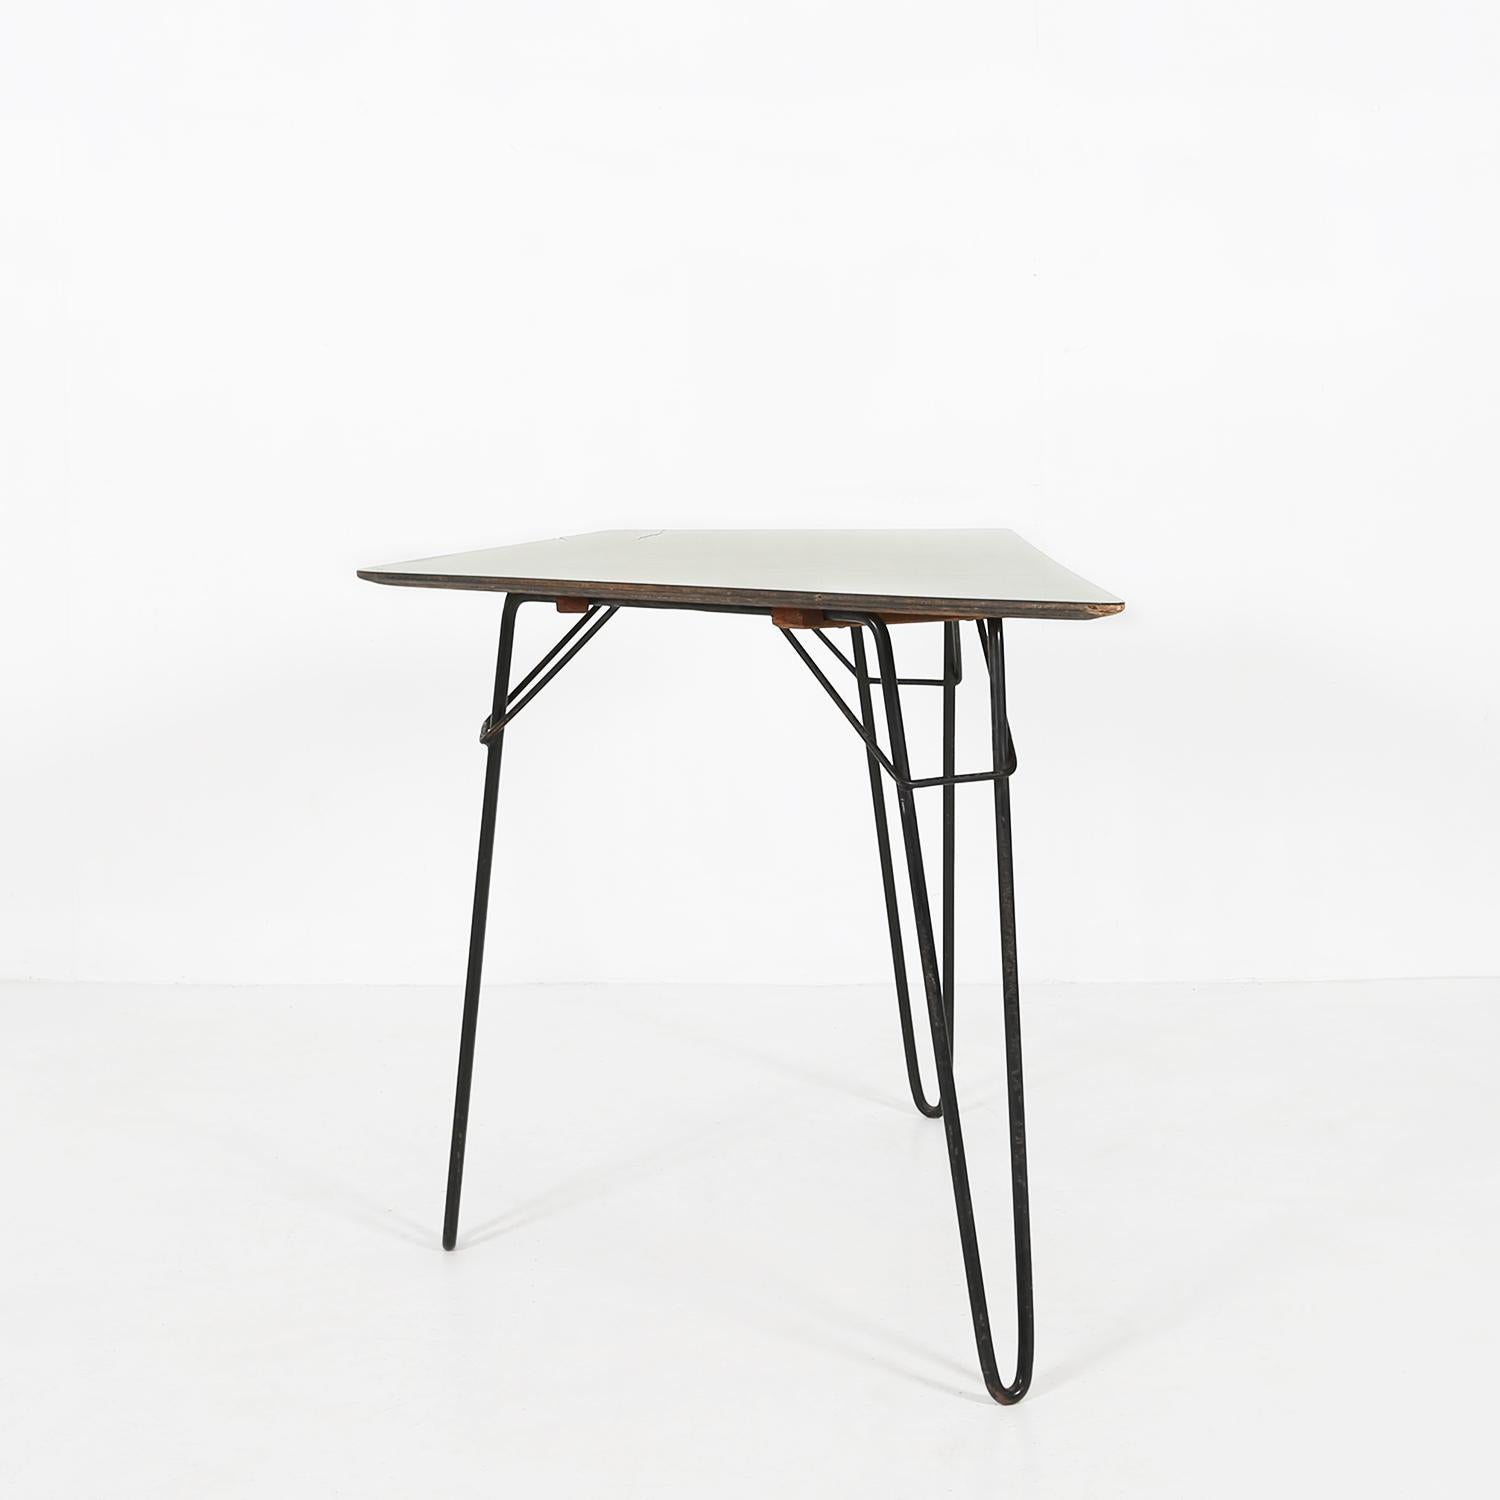 T1 dining table designed by Willy Van Der Meeren for Tubax in 1954.
Made of a black painted metal base and a wooden top with light yellow formica top.

There has been some small restorations don on the table top.
The tables are in a good vintage